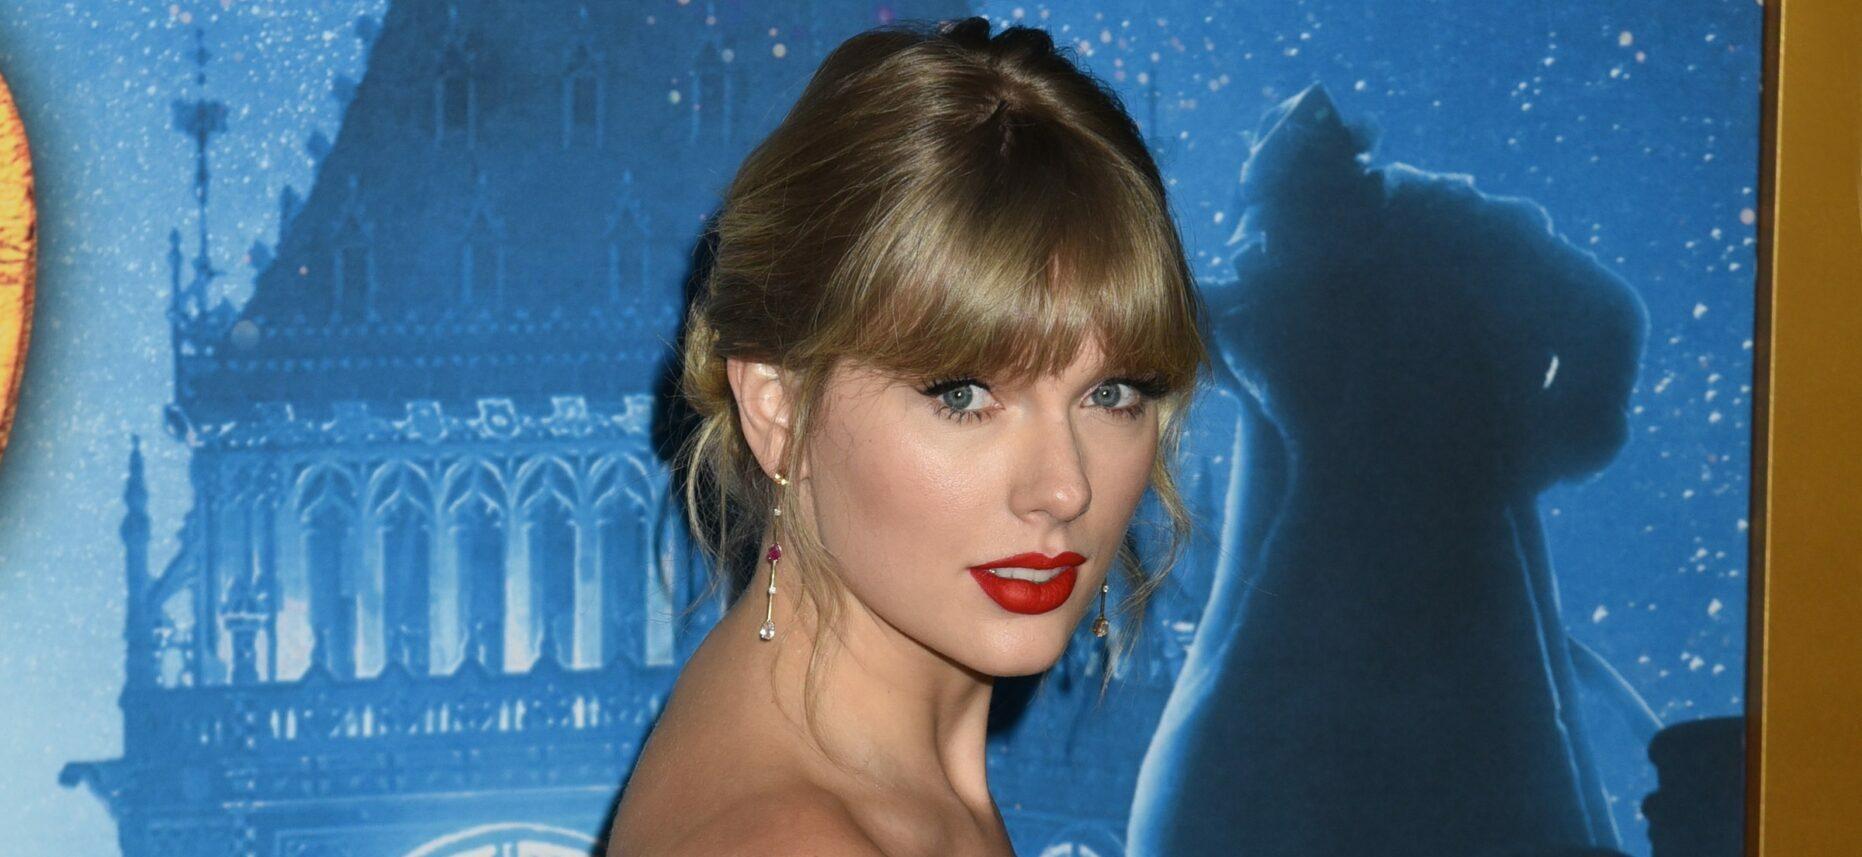 World Premiere of "CATS" at Alice Tully Hall in Lincoln Center, New York, New York, USA, on 16 December 2019. 16 Dec 2019 Pictured: Taylor Swift.